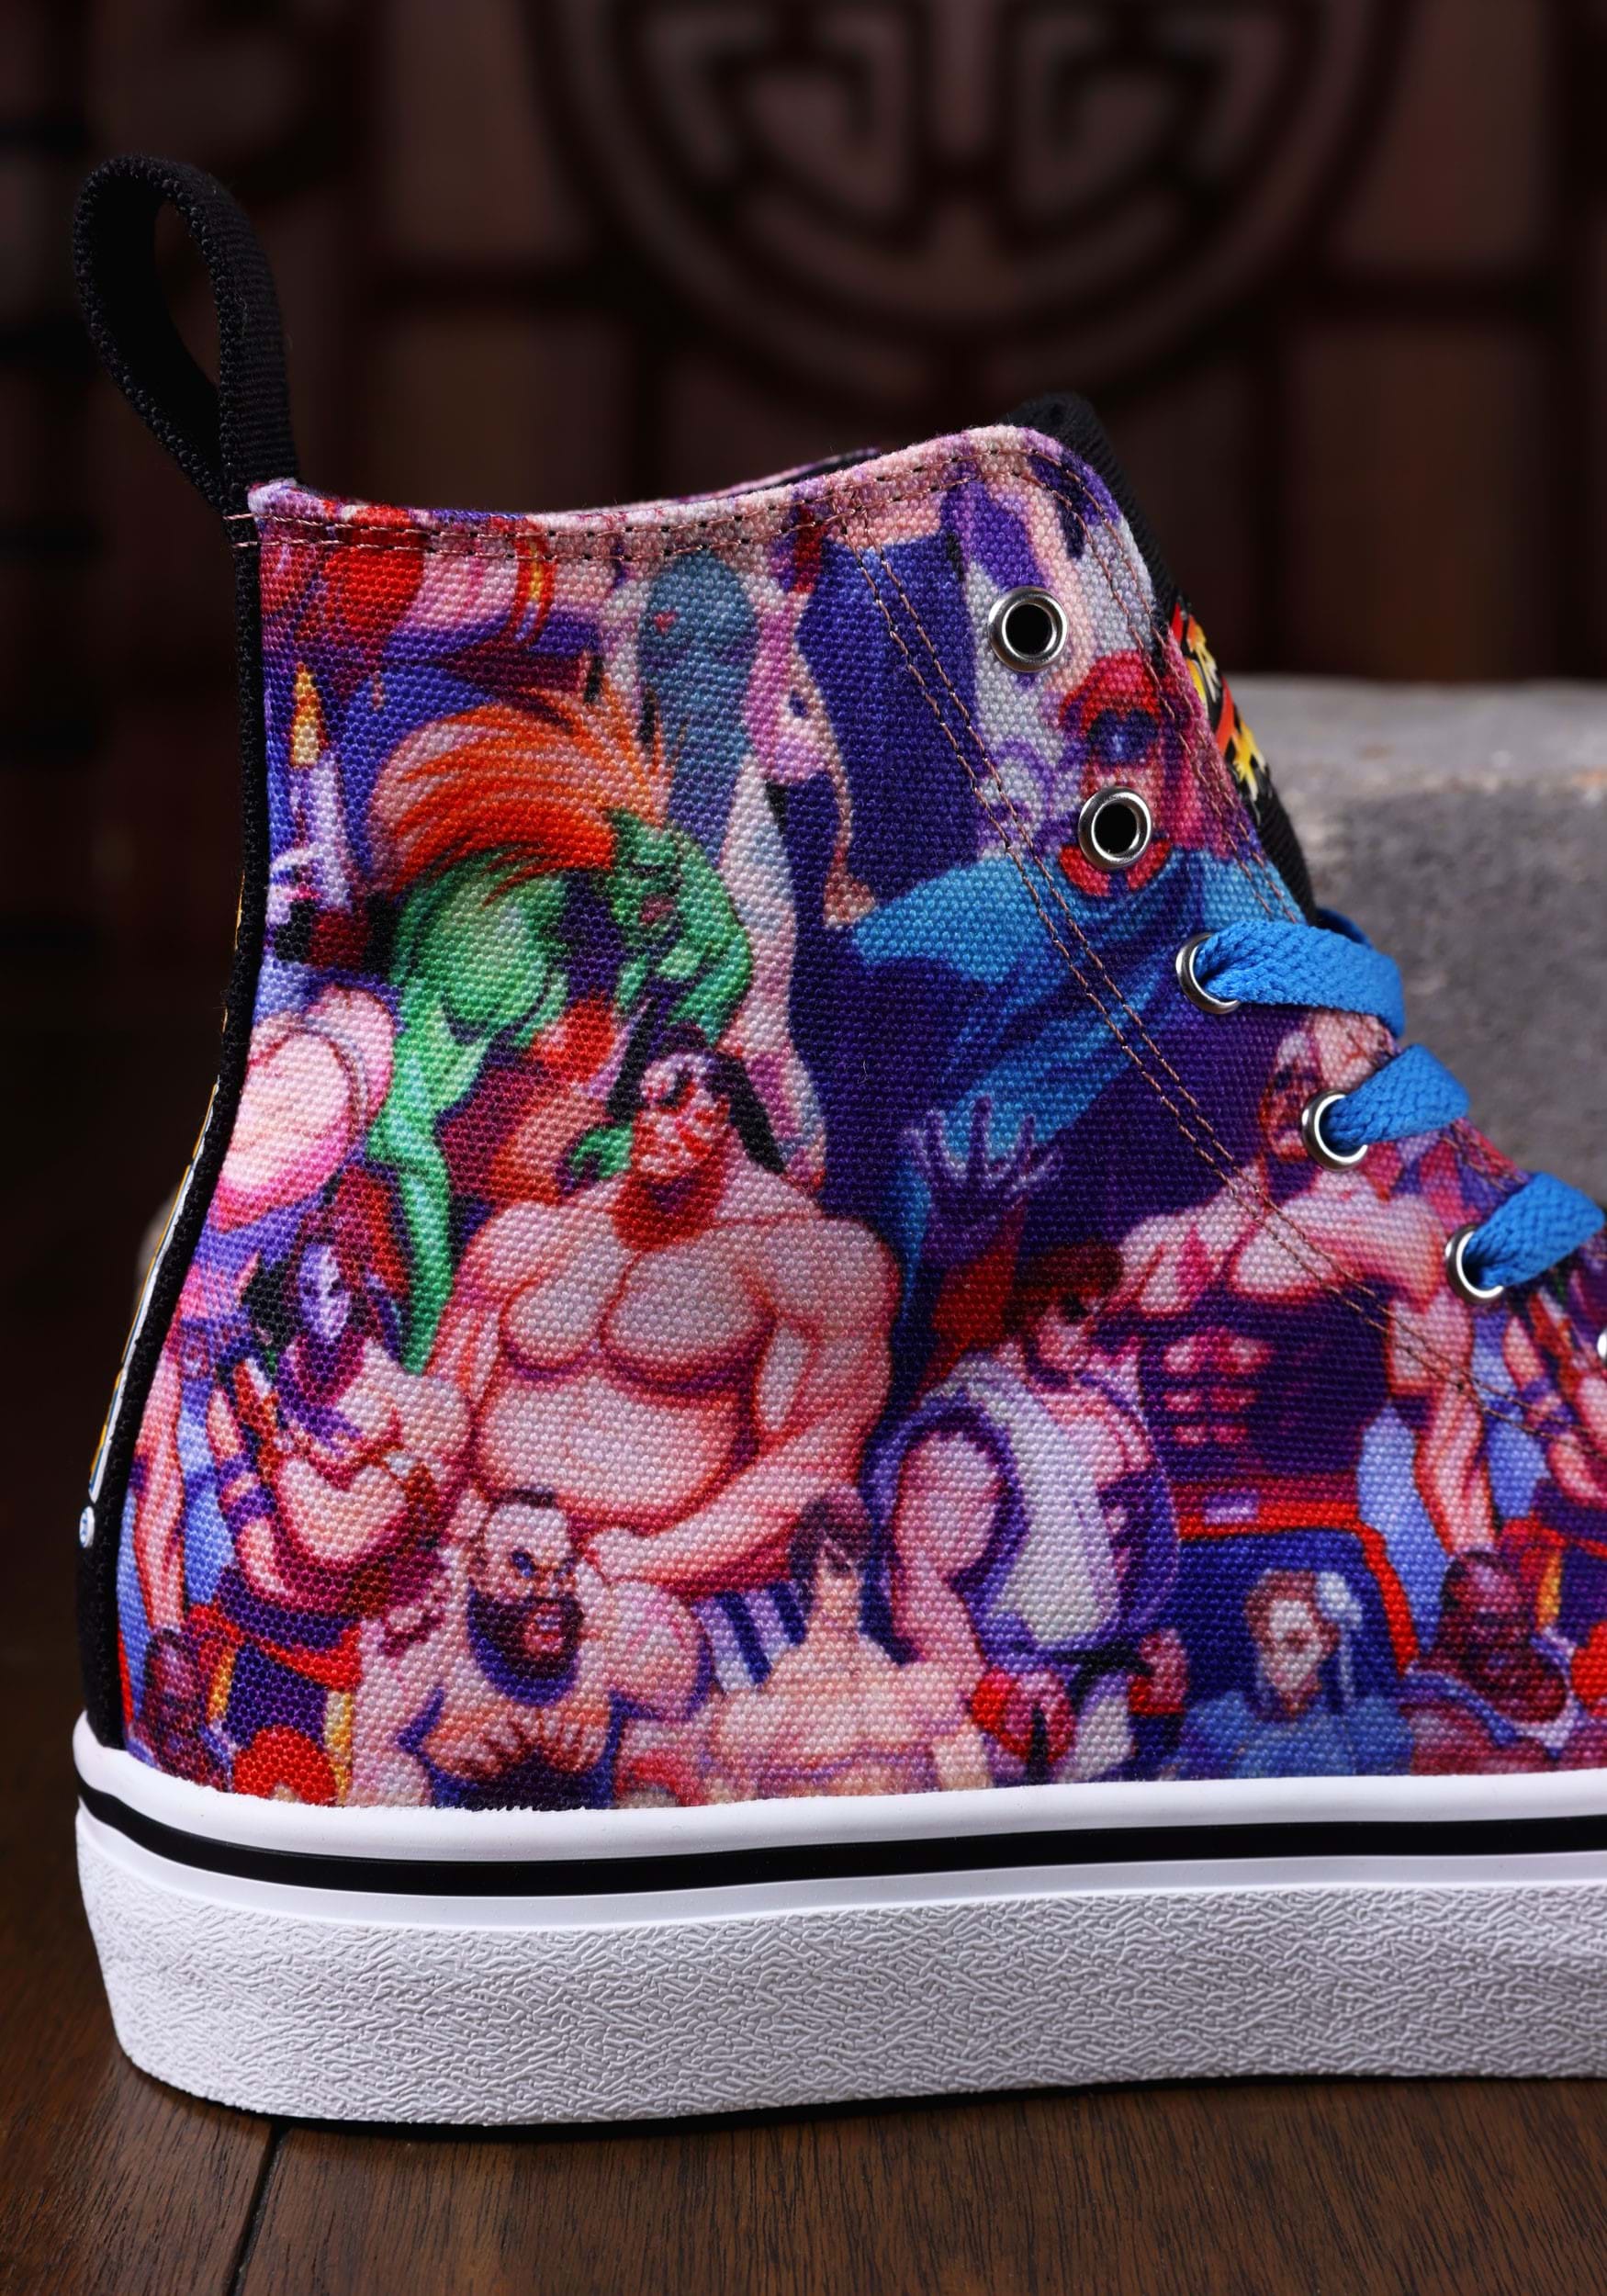 Street Fighter High Top Adult Sneakers